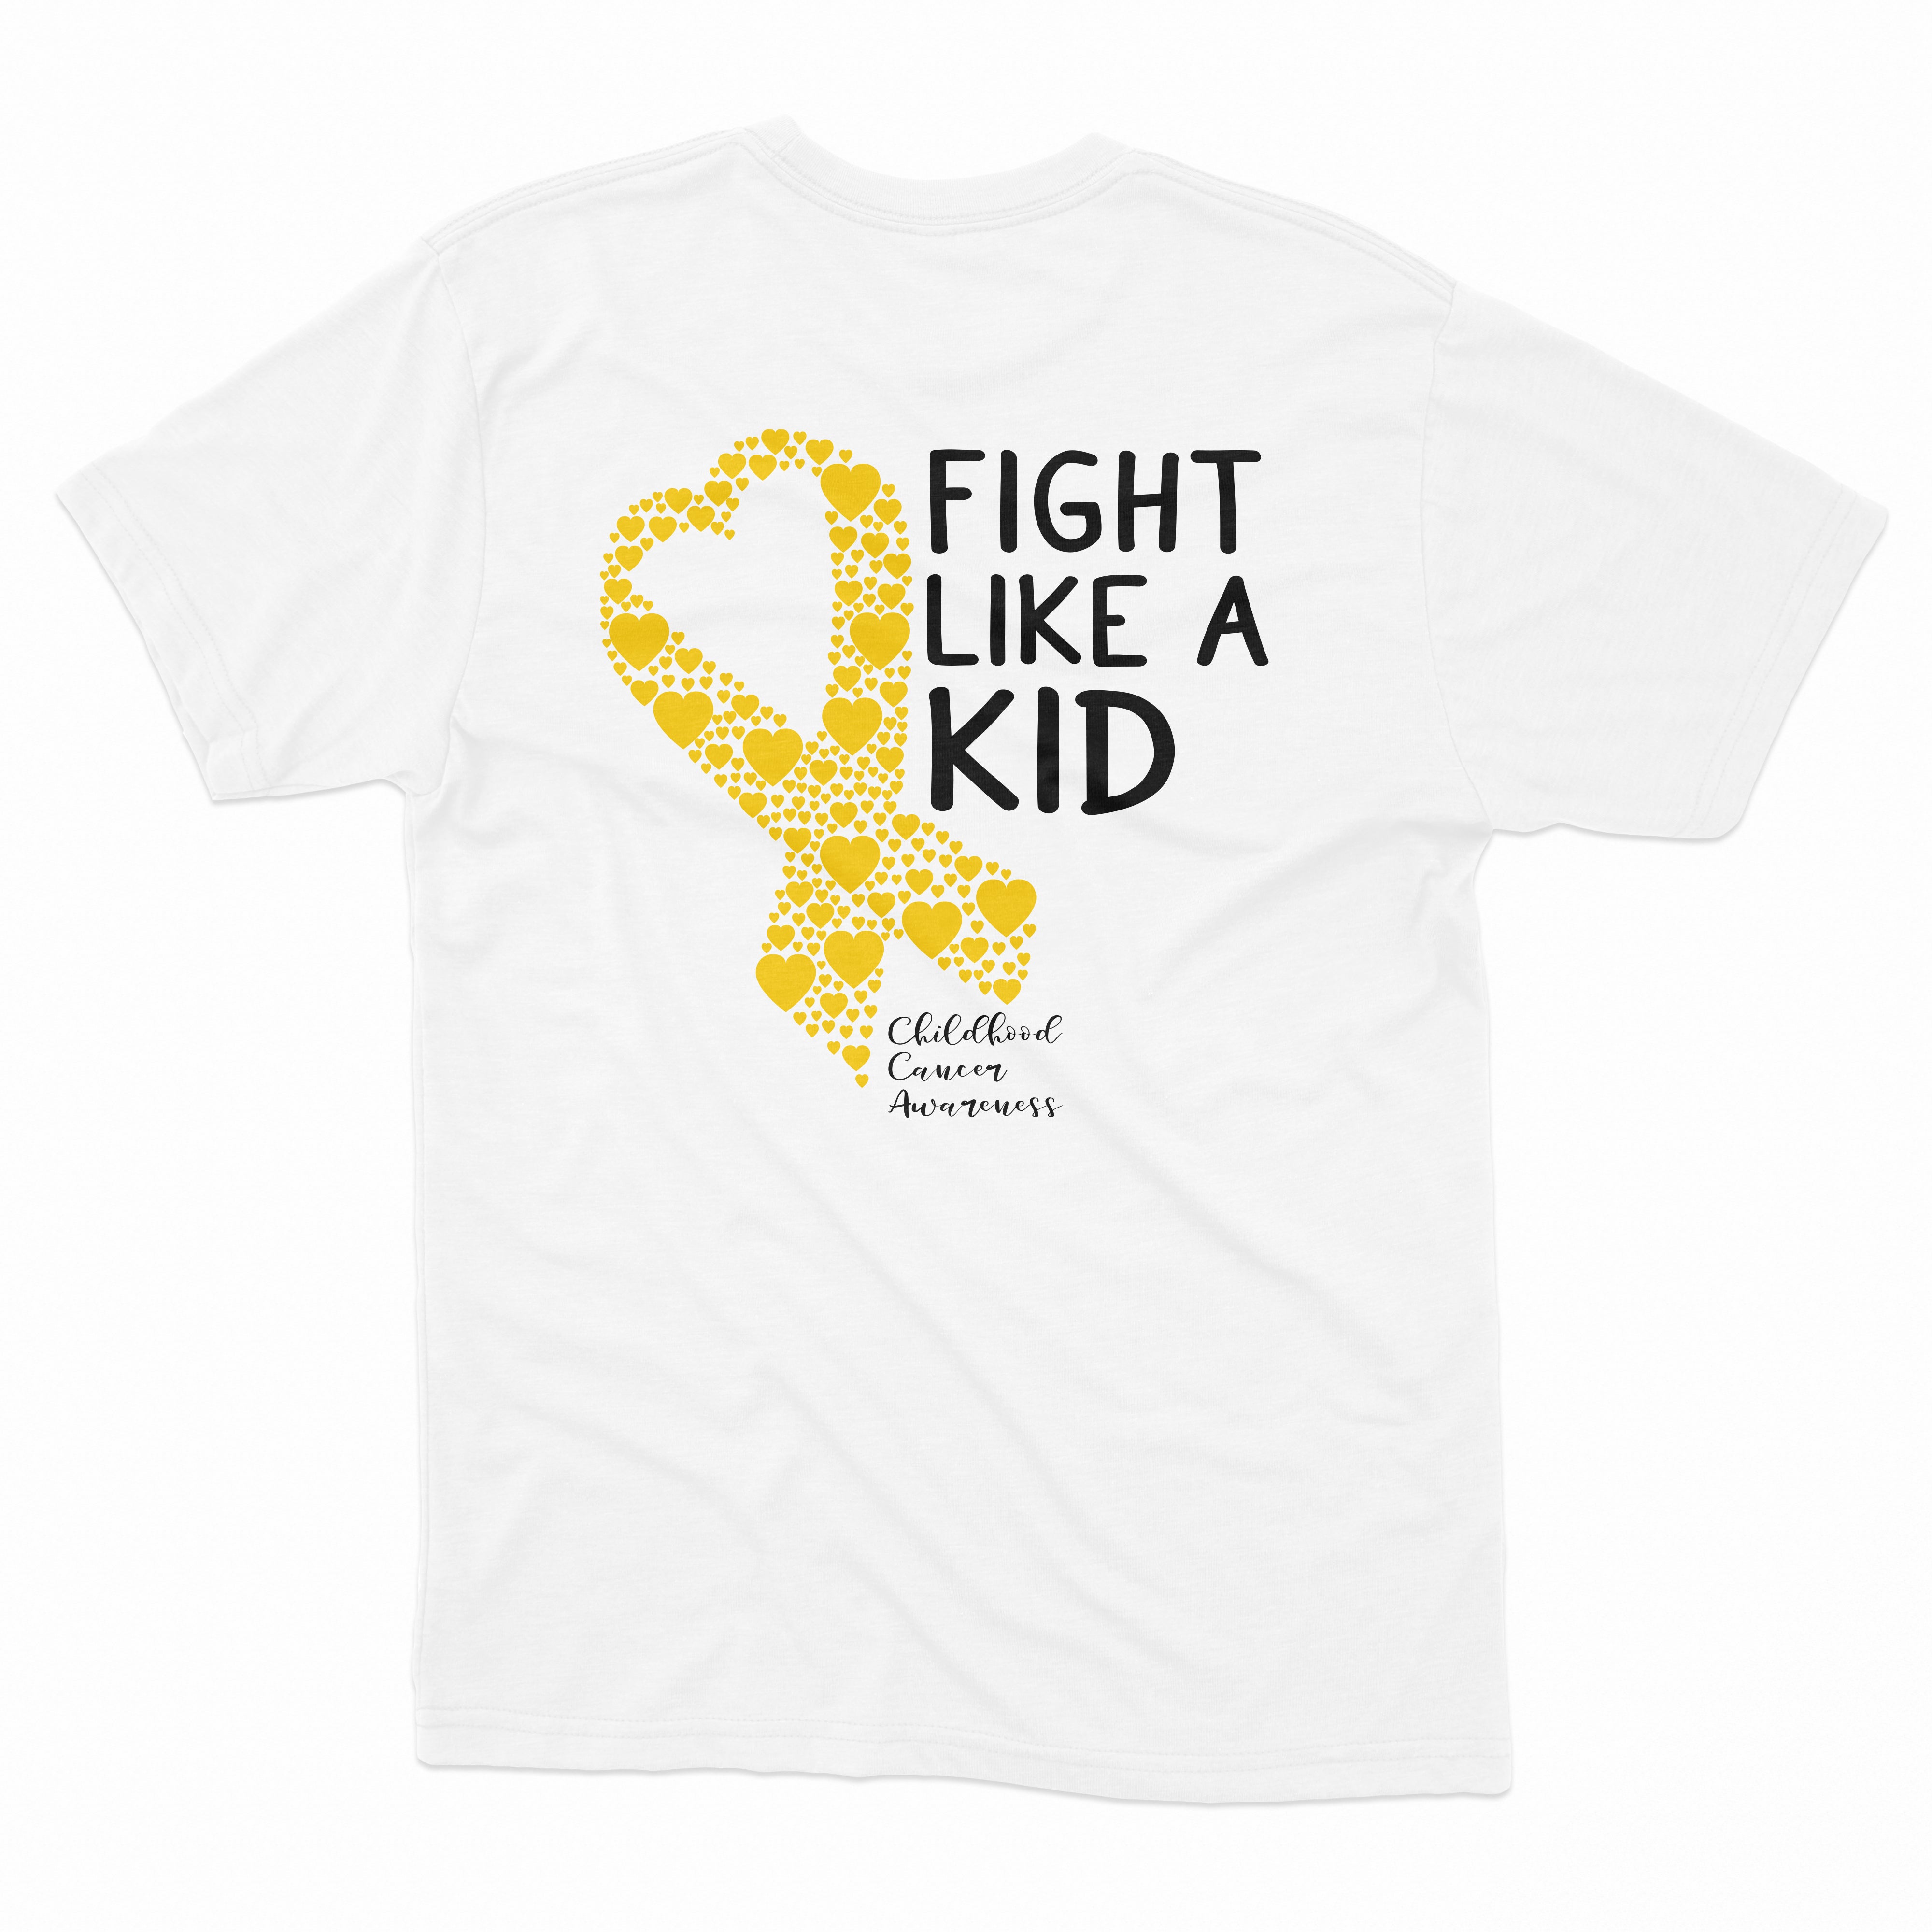 Limited Release Fight Like a Kid Shirt